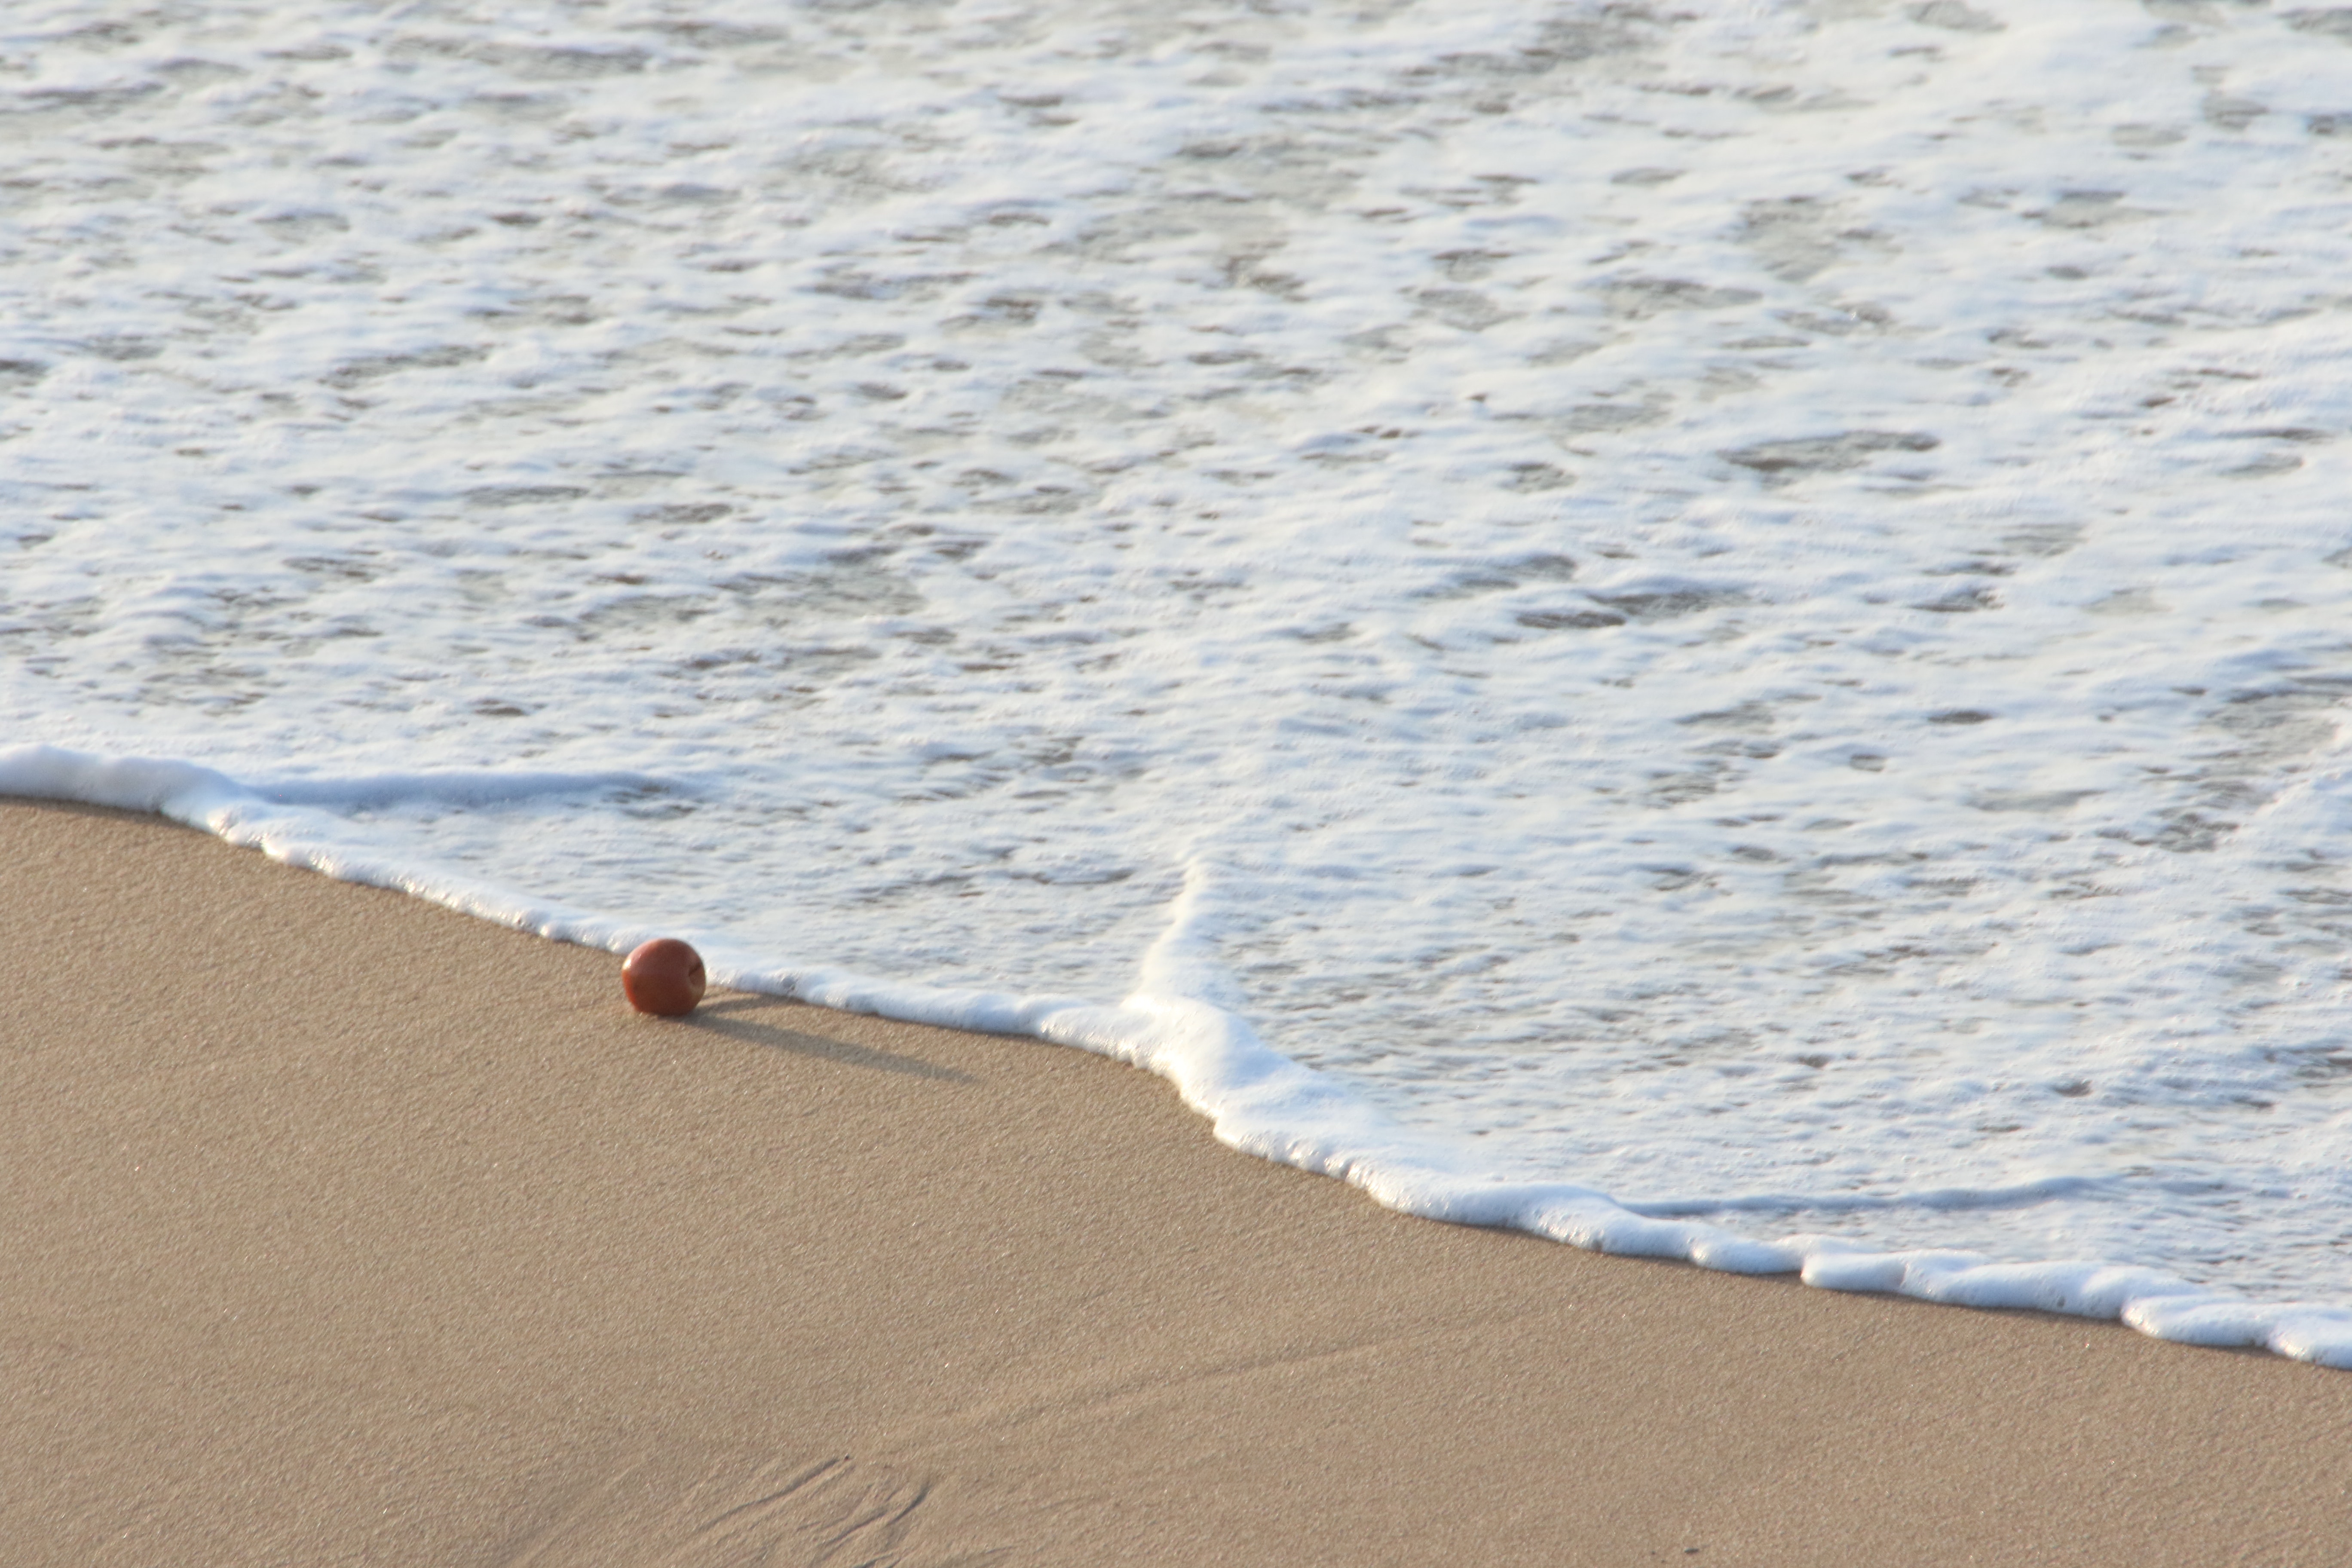 small ball on the beach near the water, small ball on the beach near the water